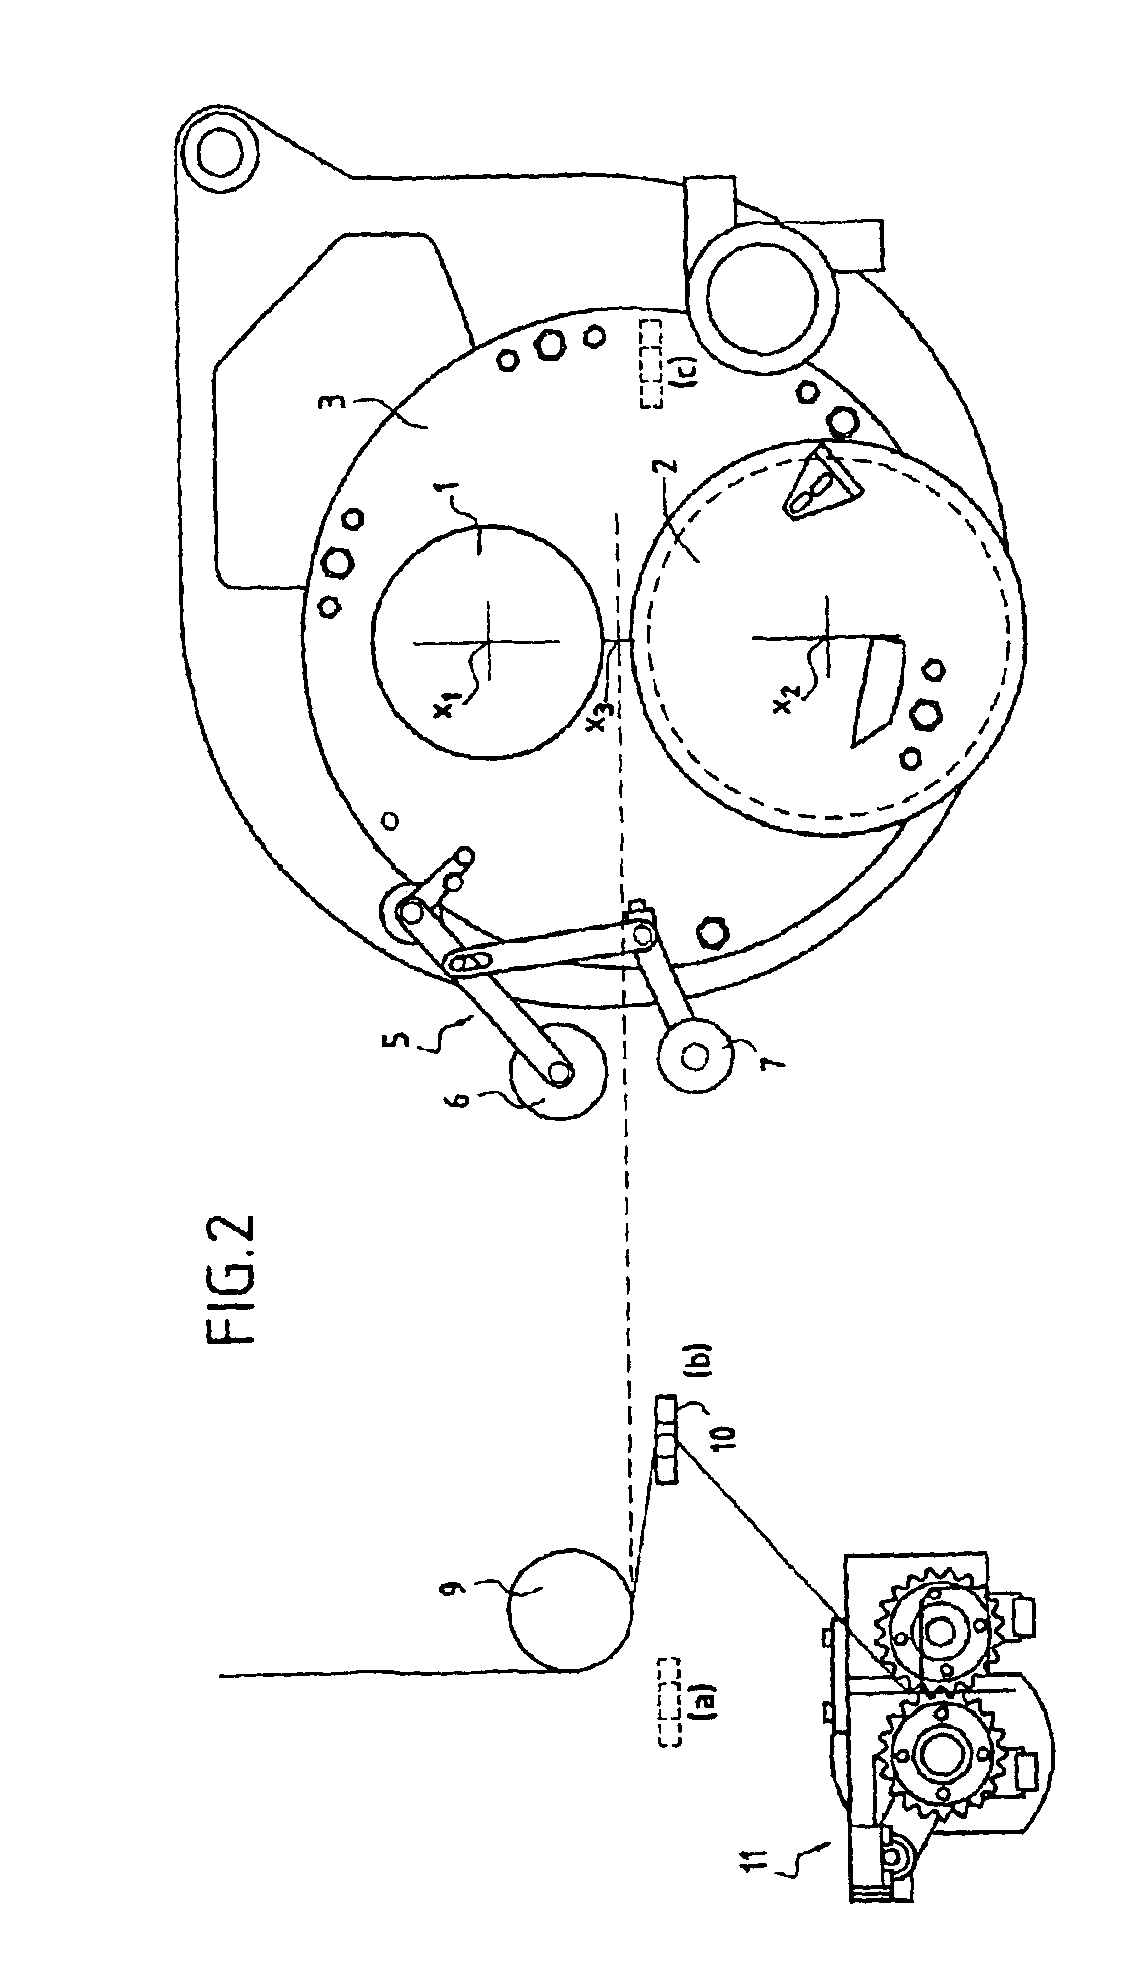 Assembly and method for cutting strands formed by thermoplastic filaments